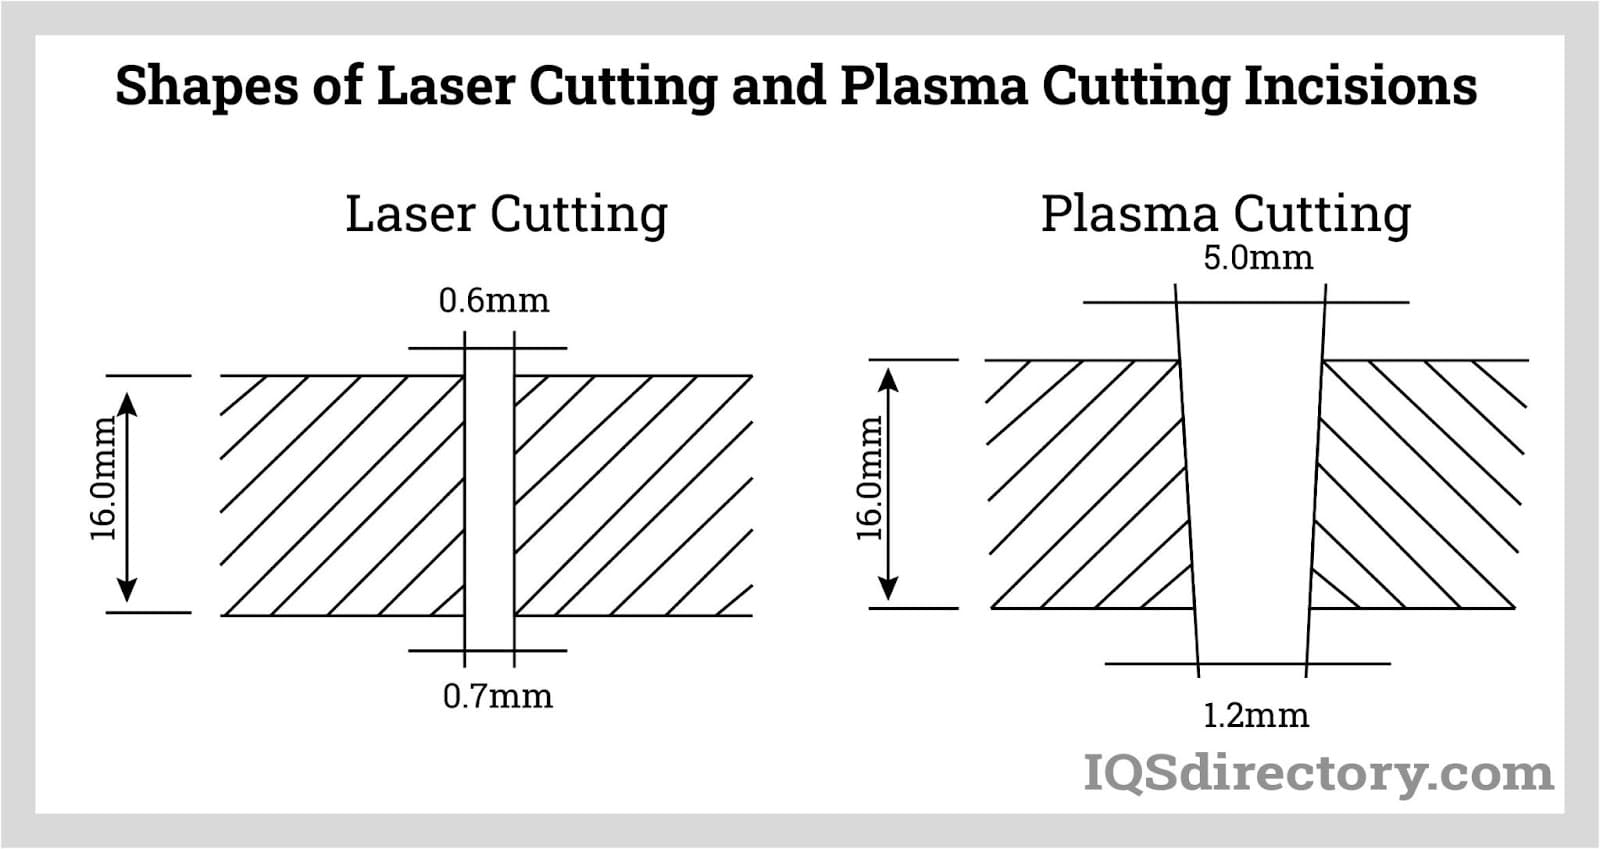 Shapes of Laser Cutting and Plasma Cutting Incisions